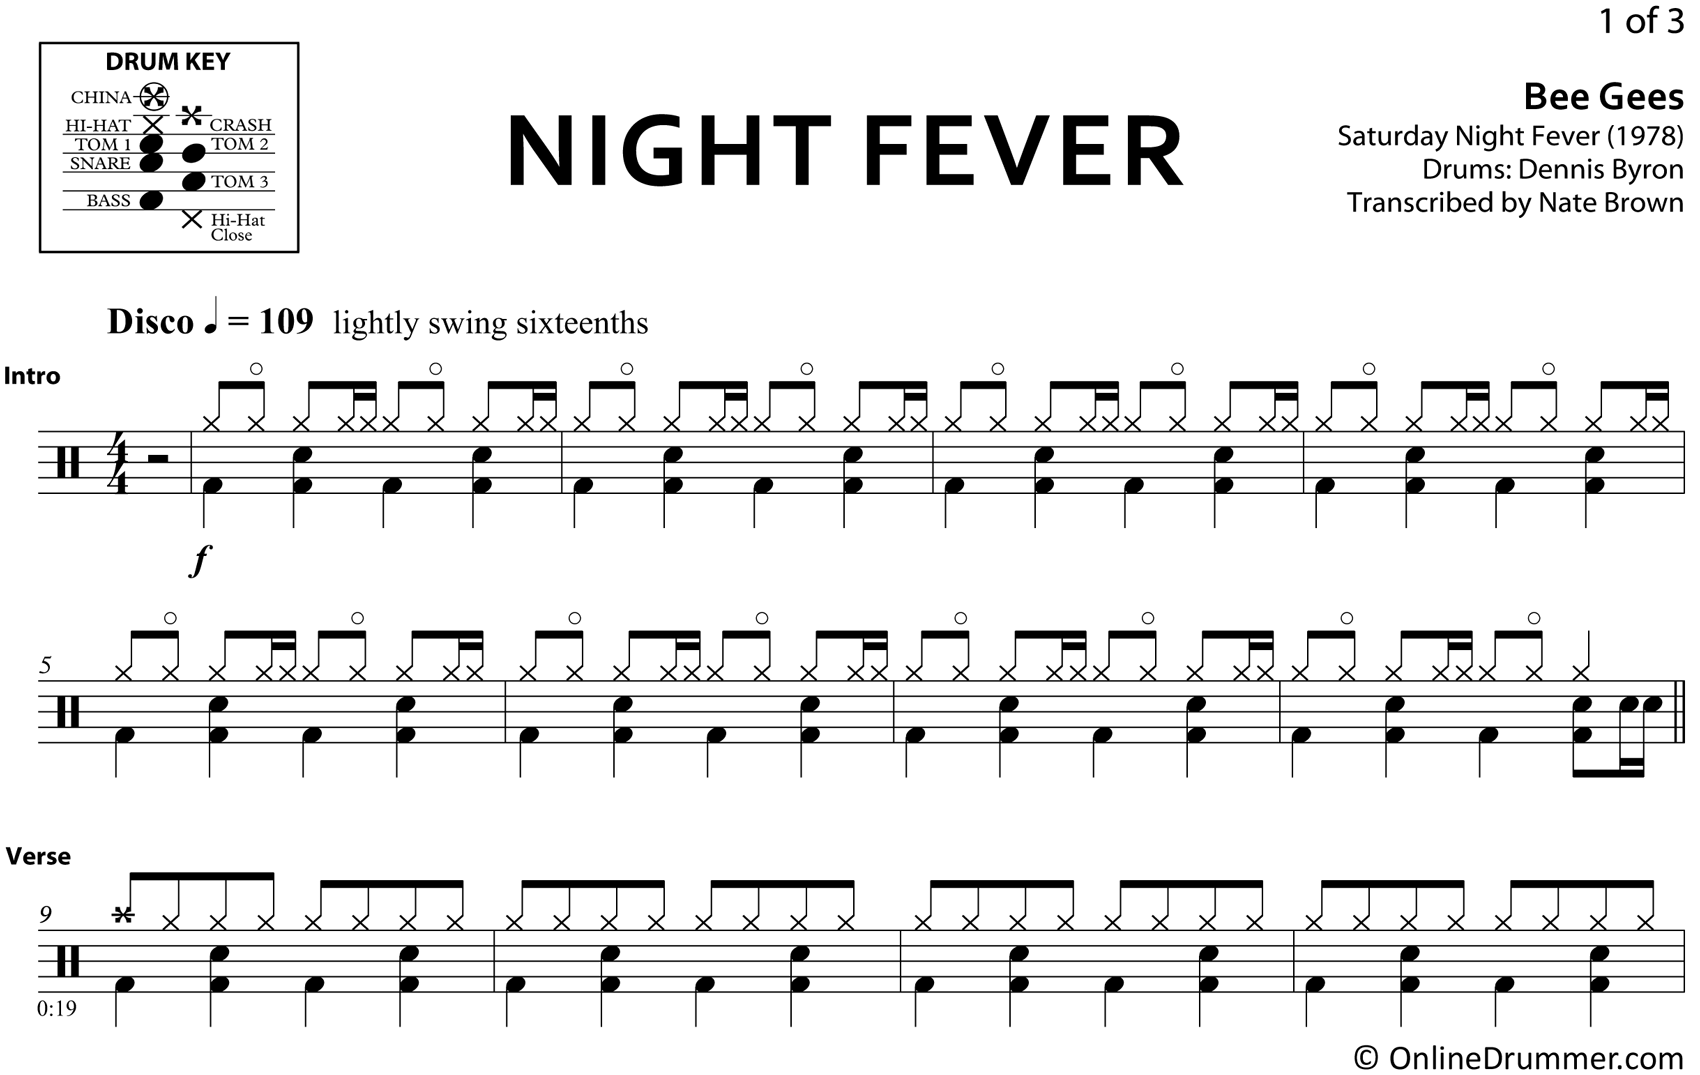 Night Fever - Bee Gees - Drum Sheet Music